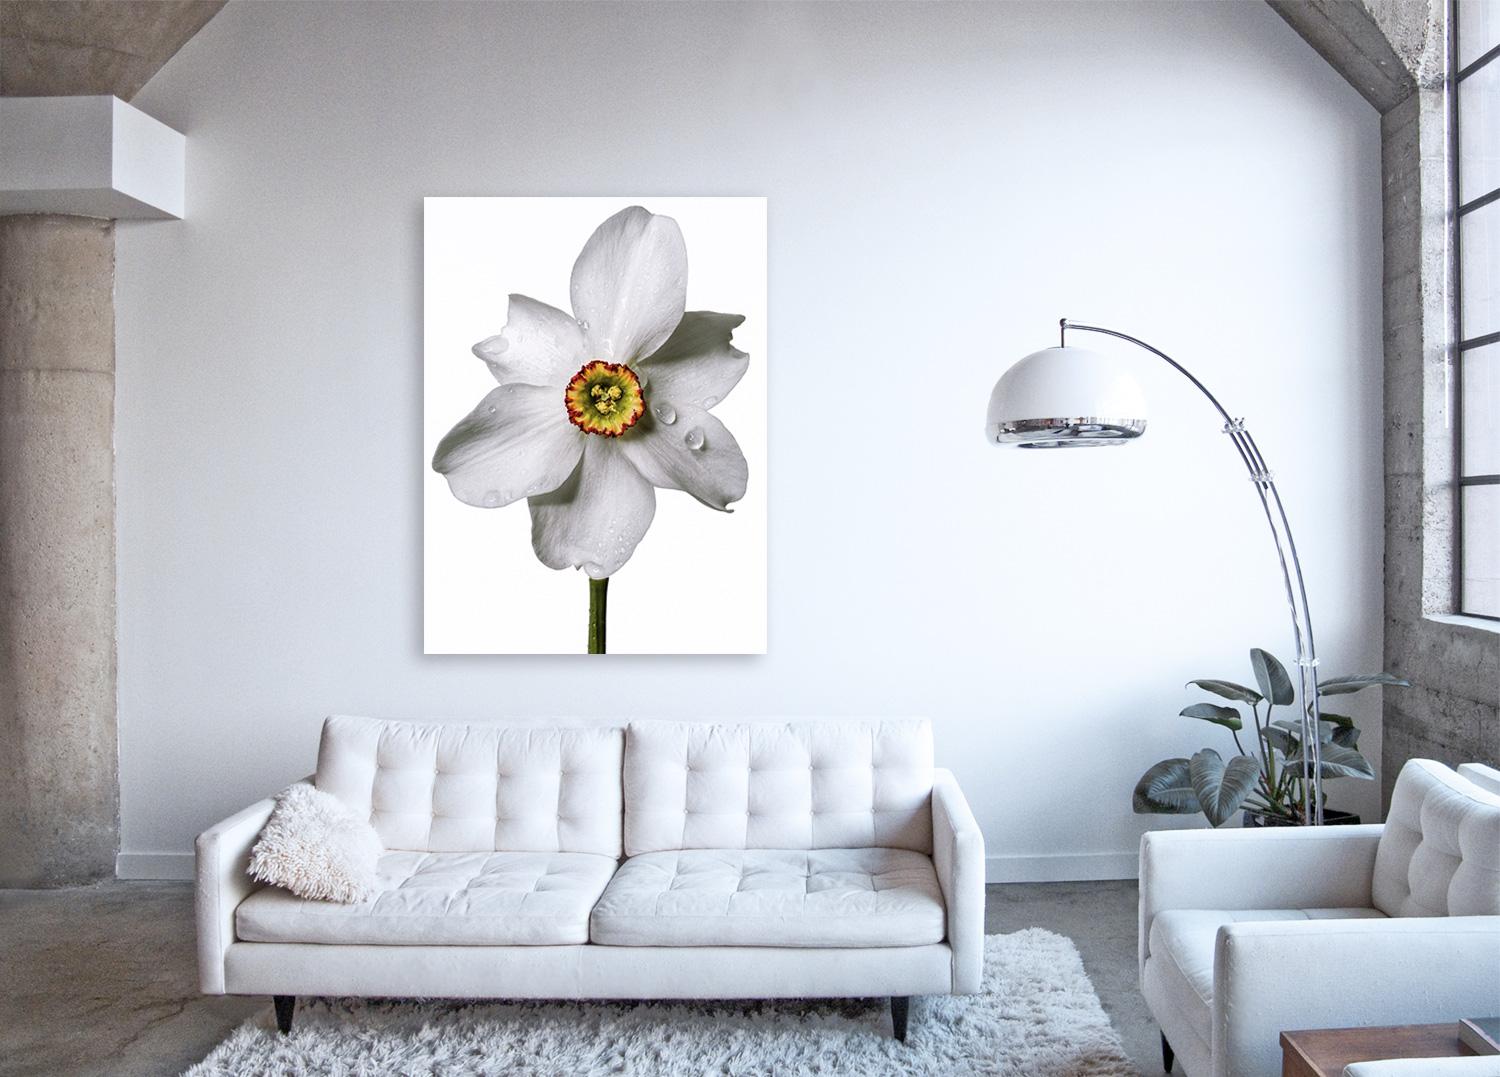 Flora Italiana ( Narcissus Poetic ) large format botanical still life photograph - Contemporary Photograph by Linda Rosewall